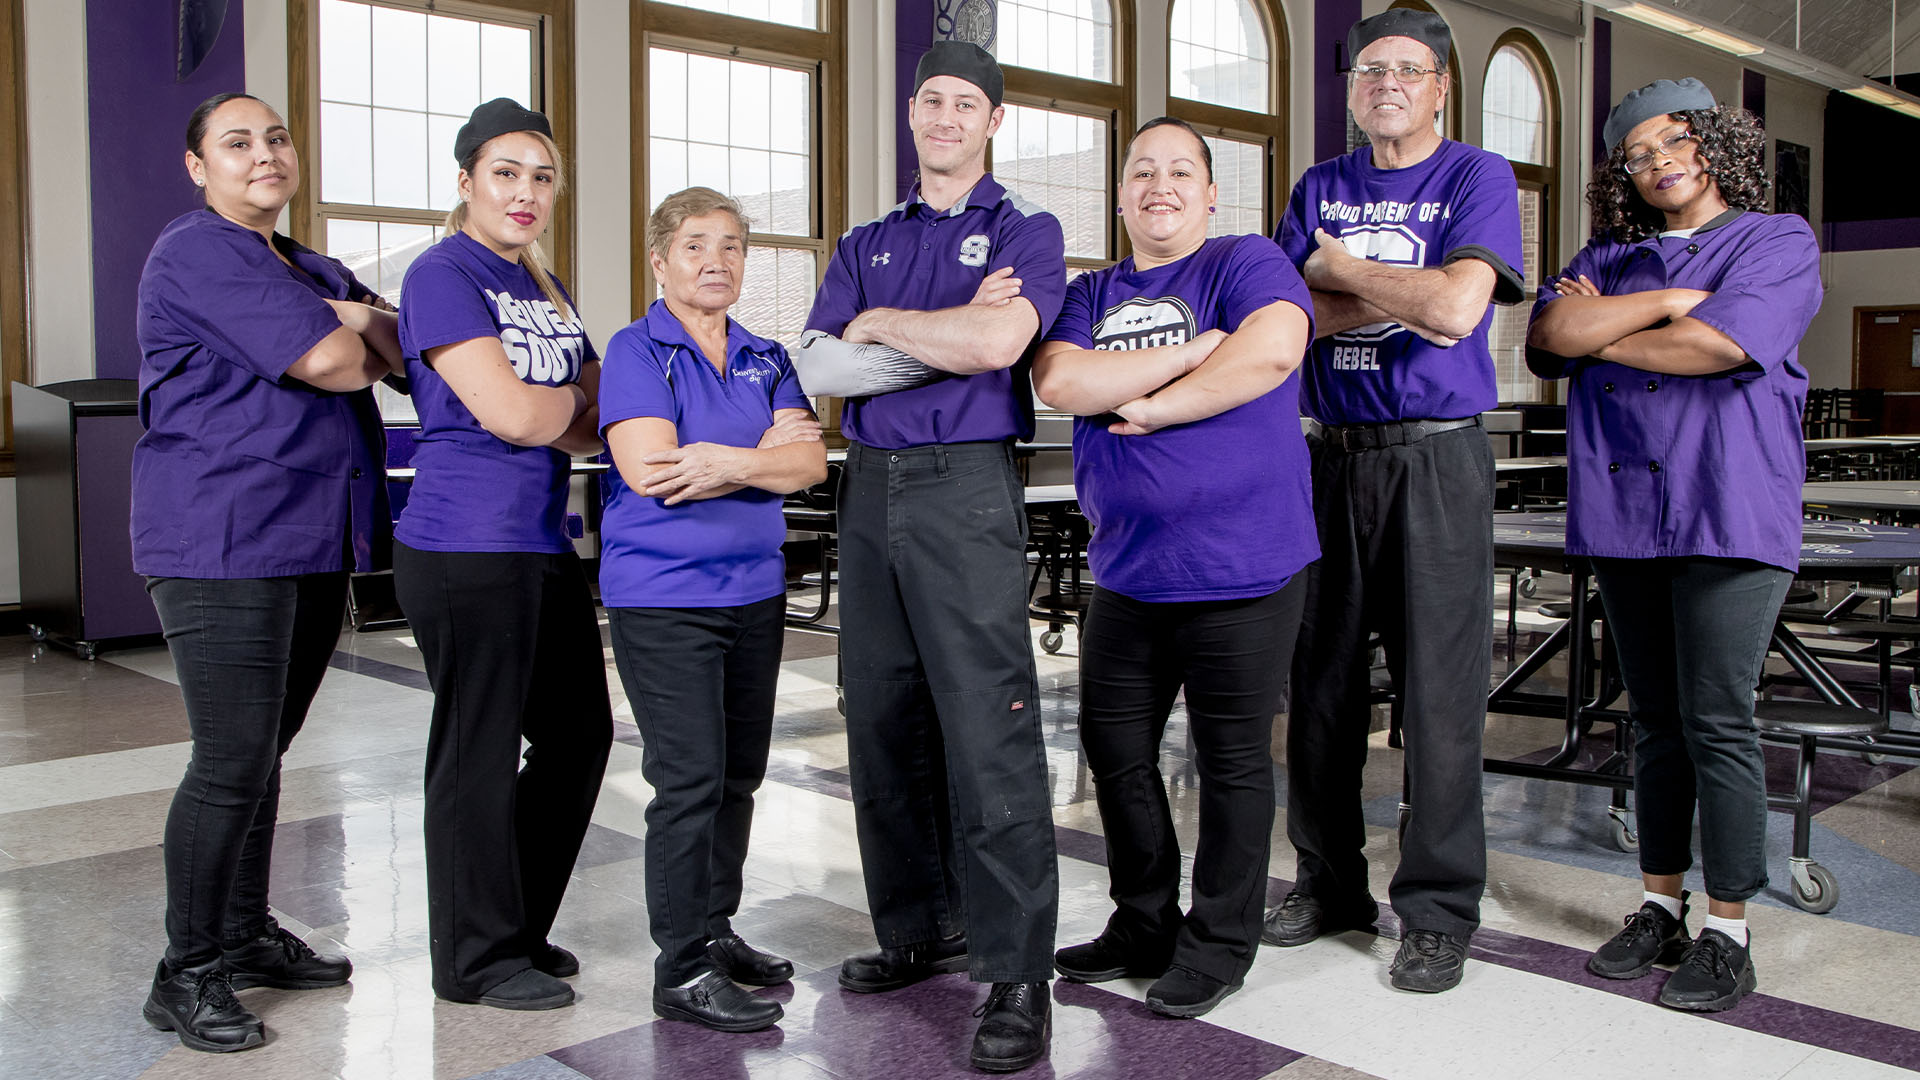 Cafeteria staff group photo